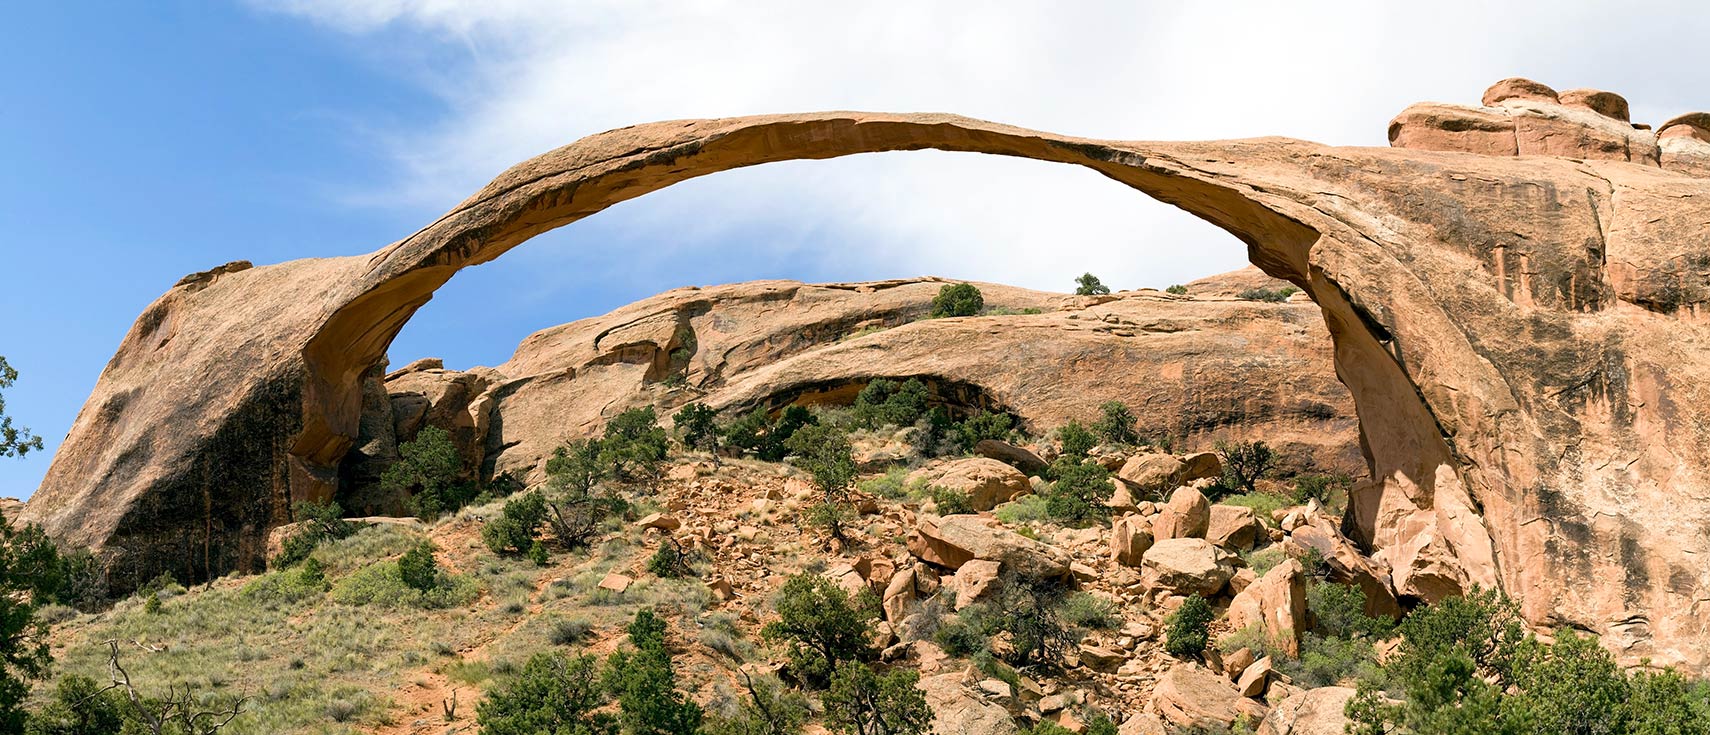 Landscape Arch in the Arches National Park in Utah